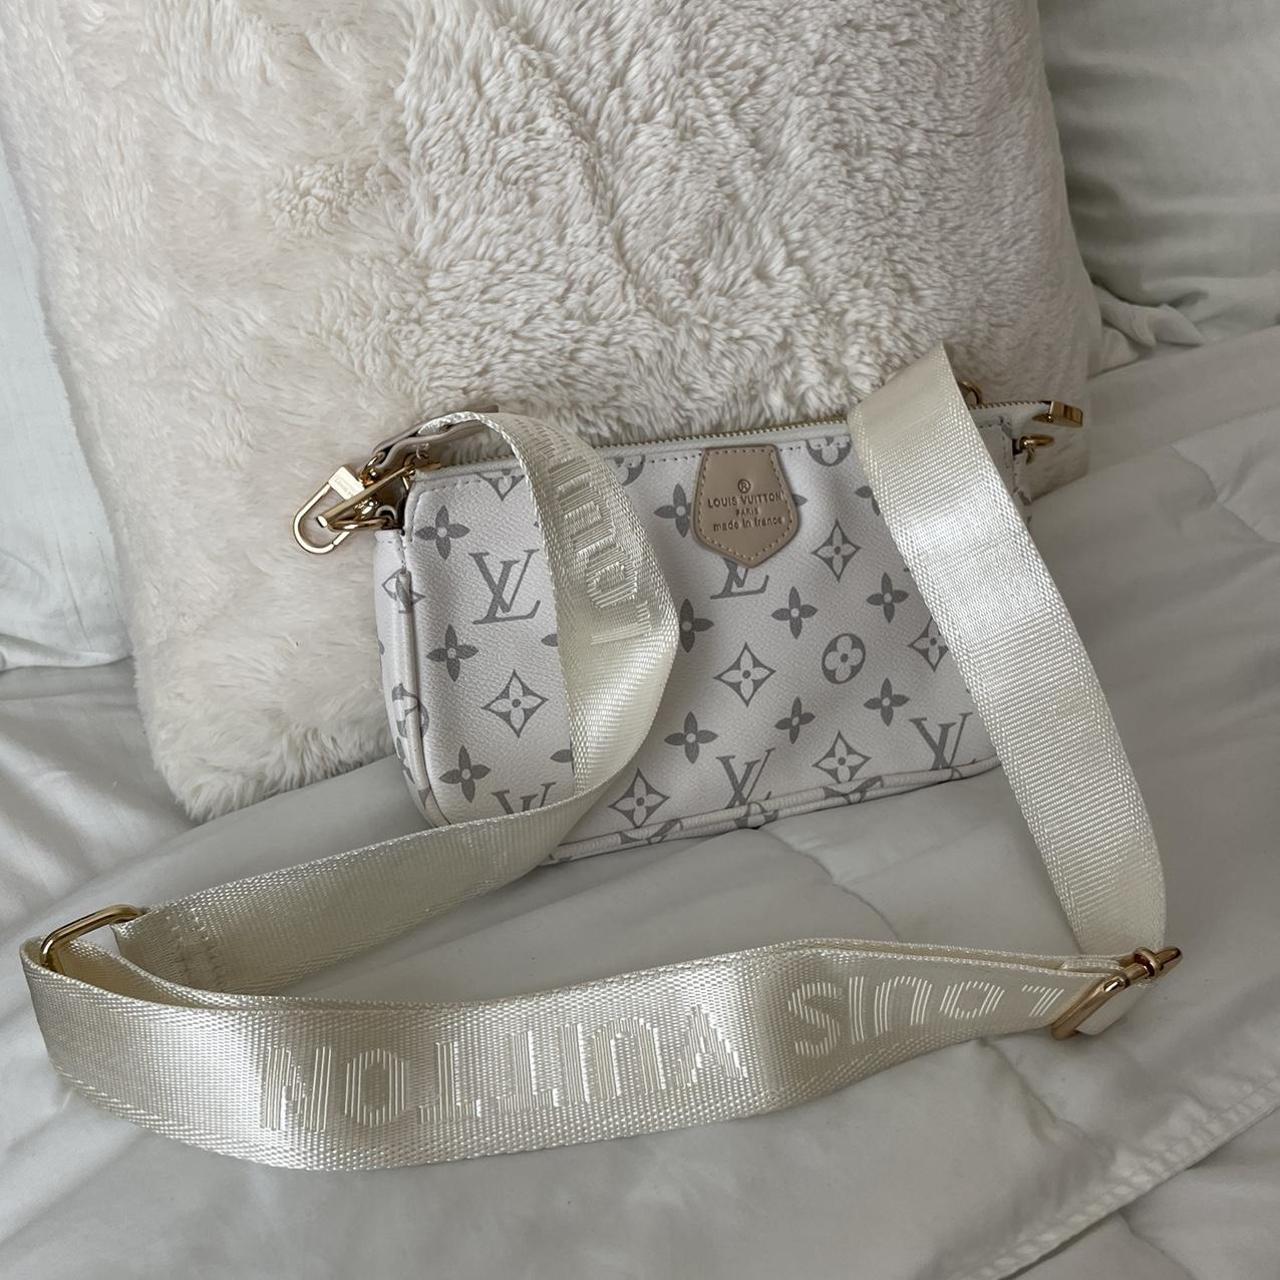 White lv bag, - comes with a small round bag that is